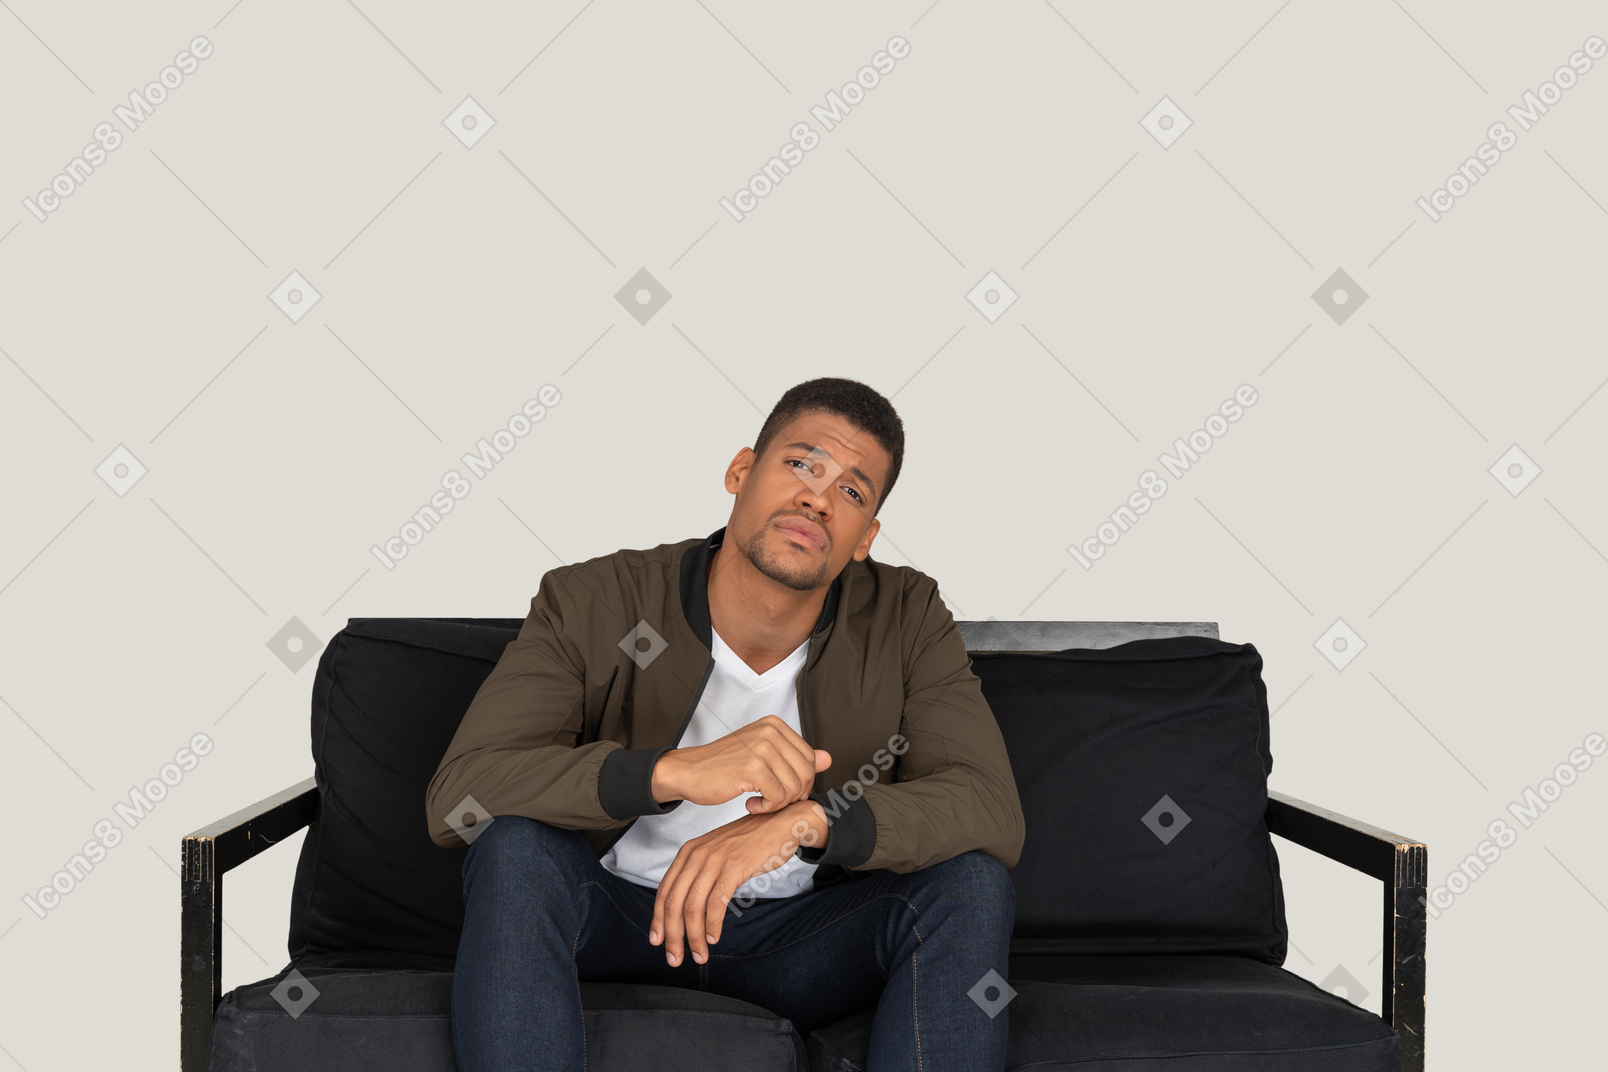 Young man sitting on the sofa